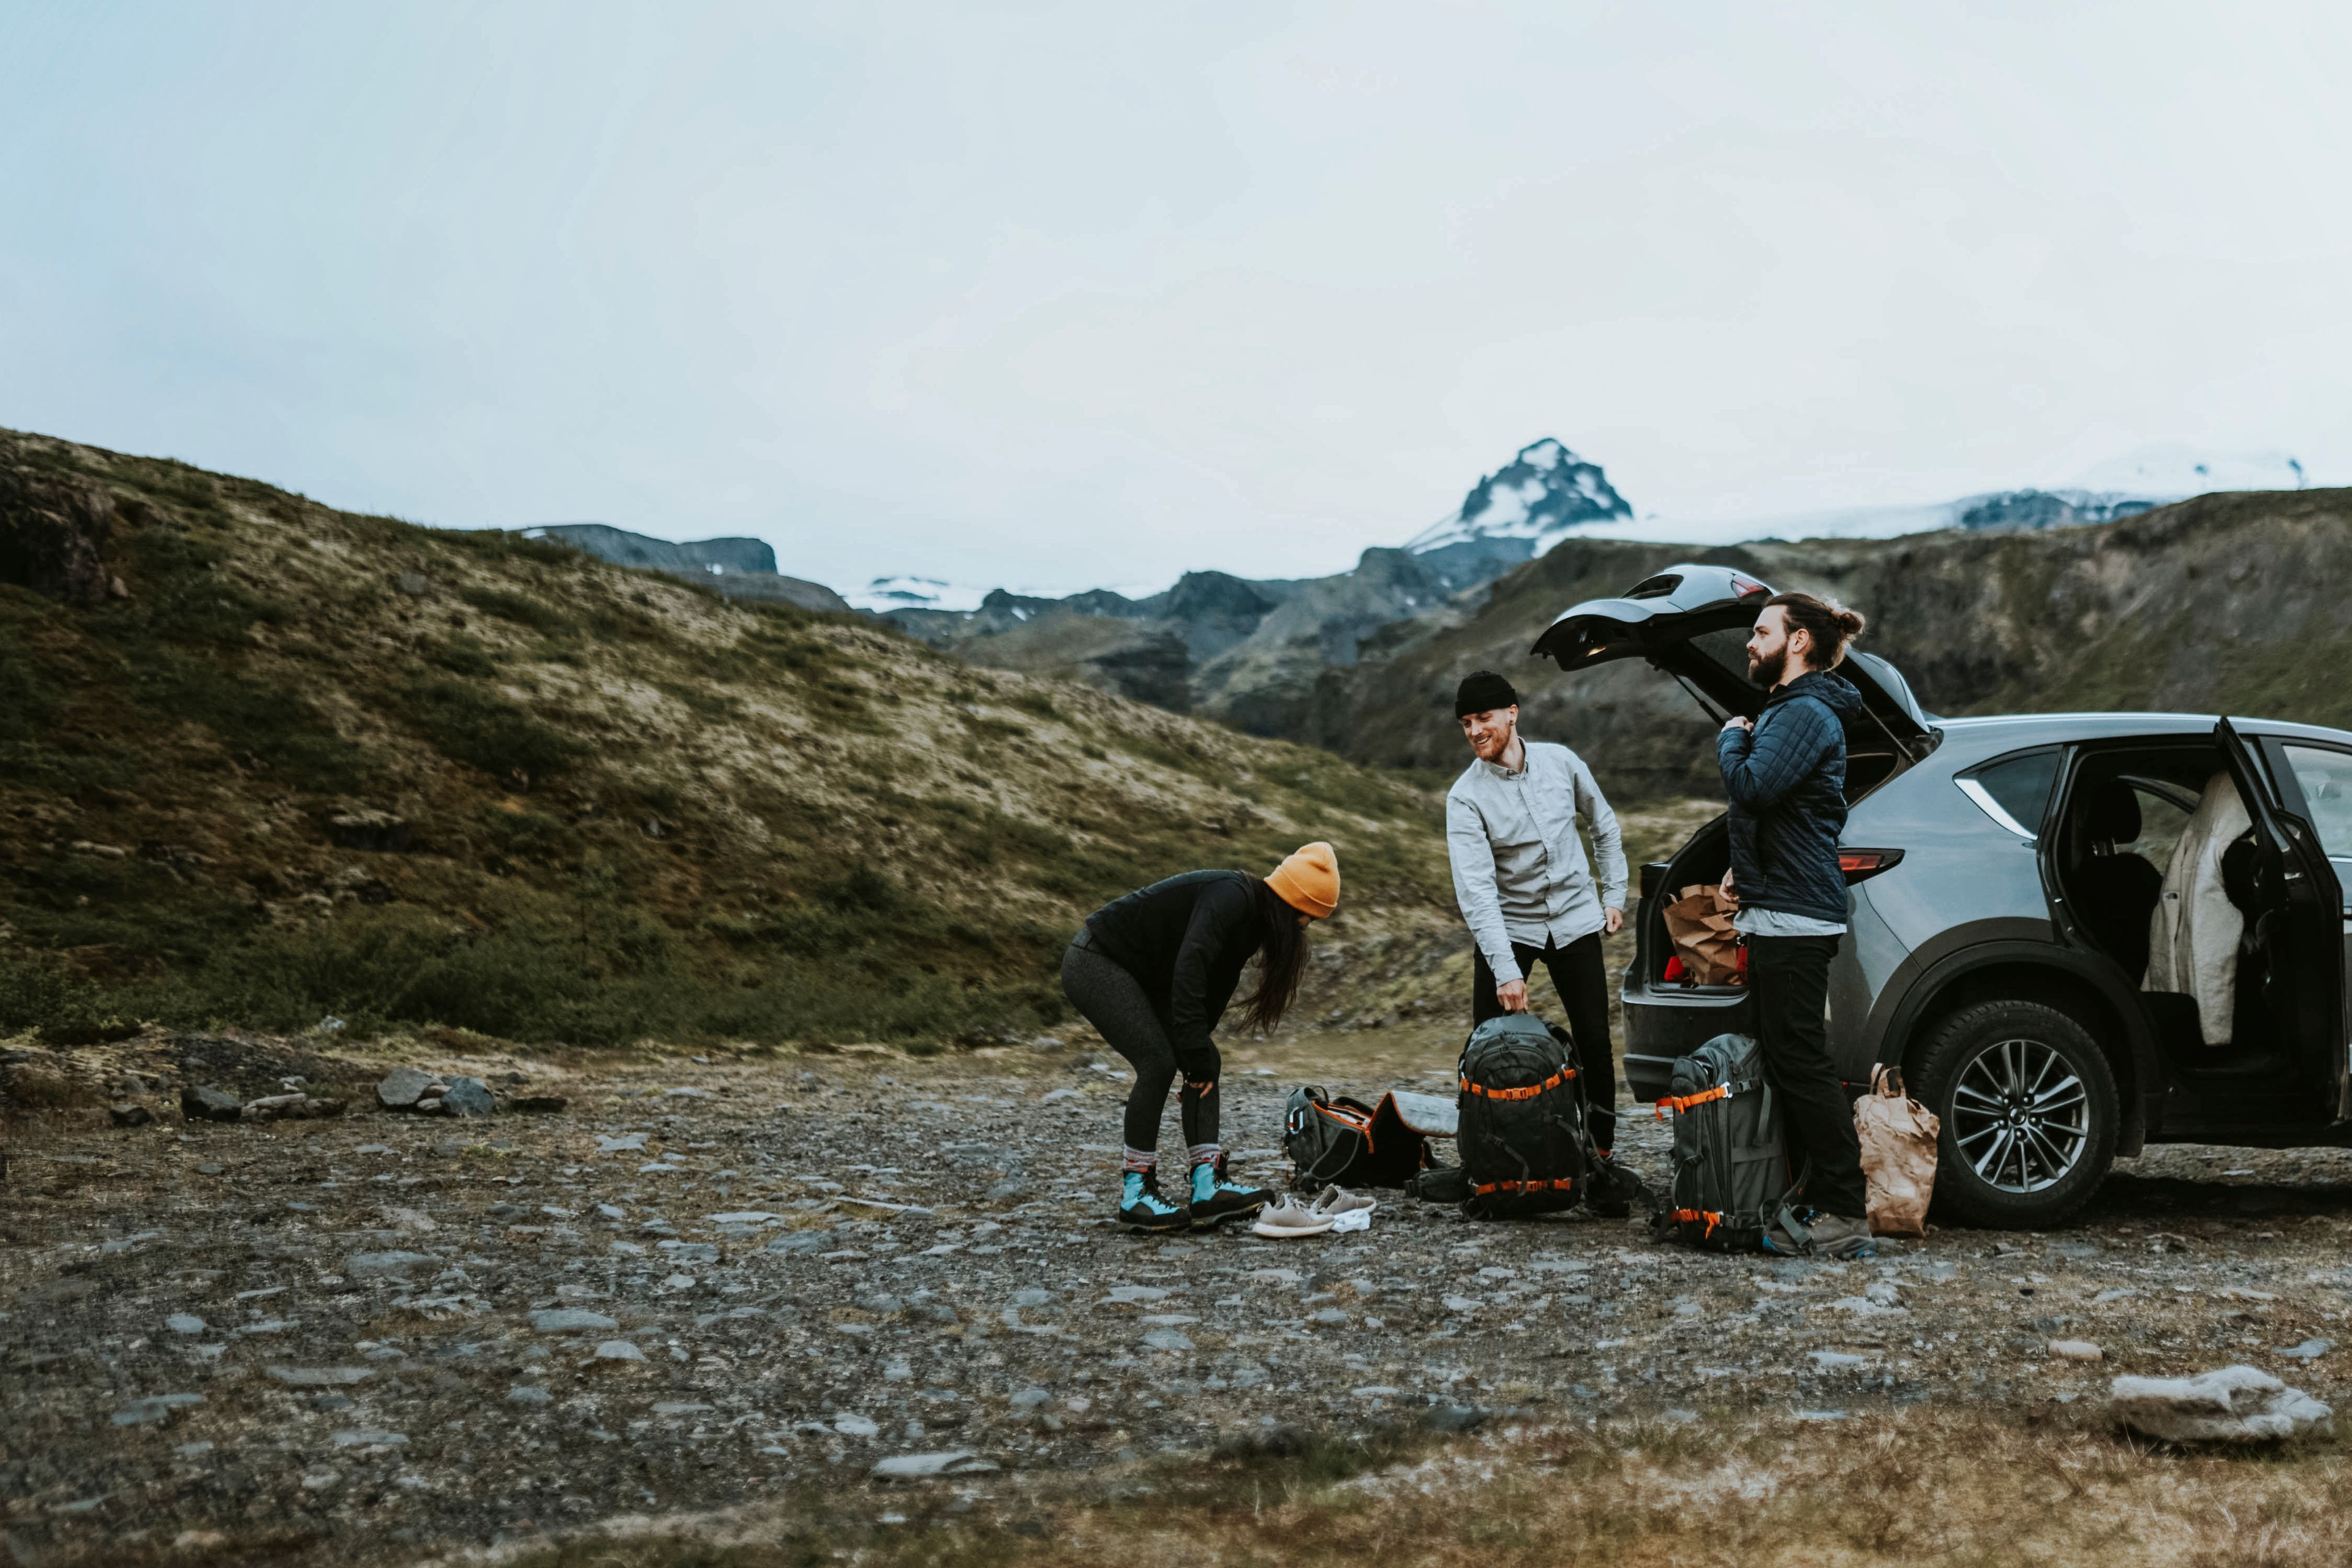 Hikers getting ready to explore iceland